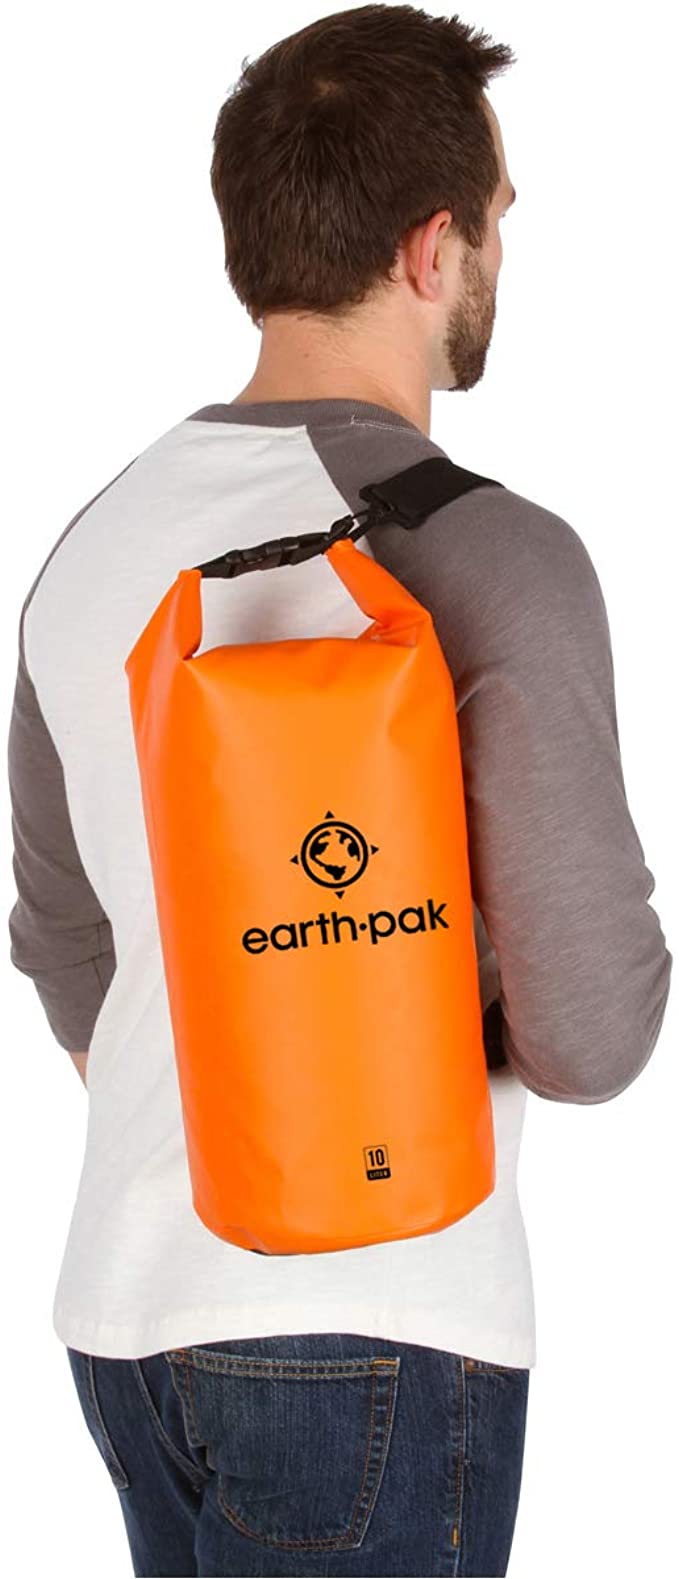 The Ideal Dry Bag for Traveling